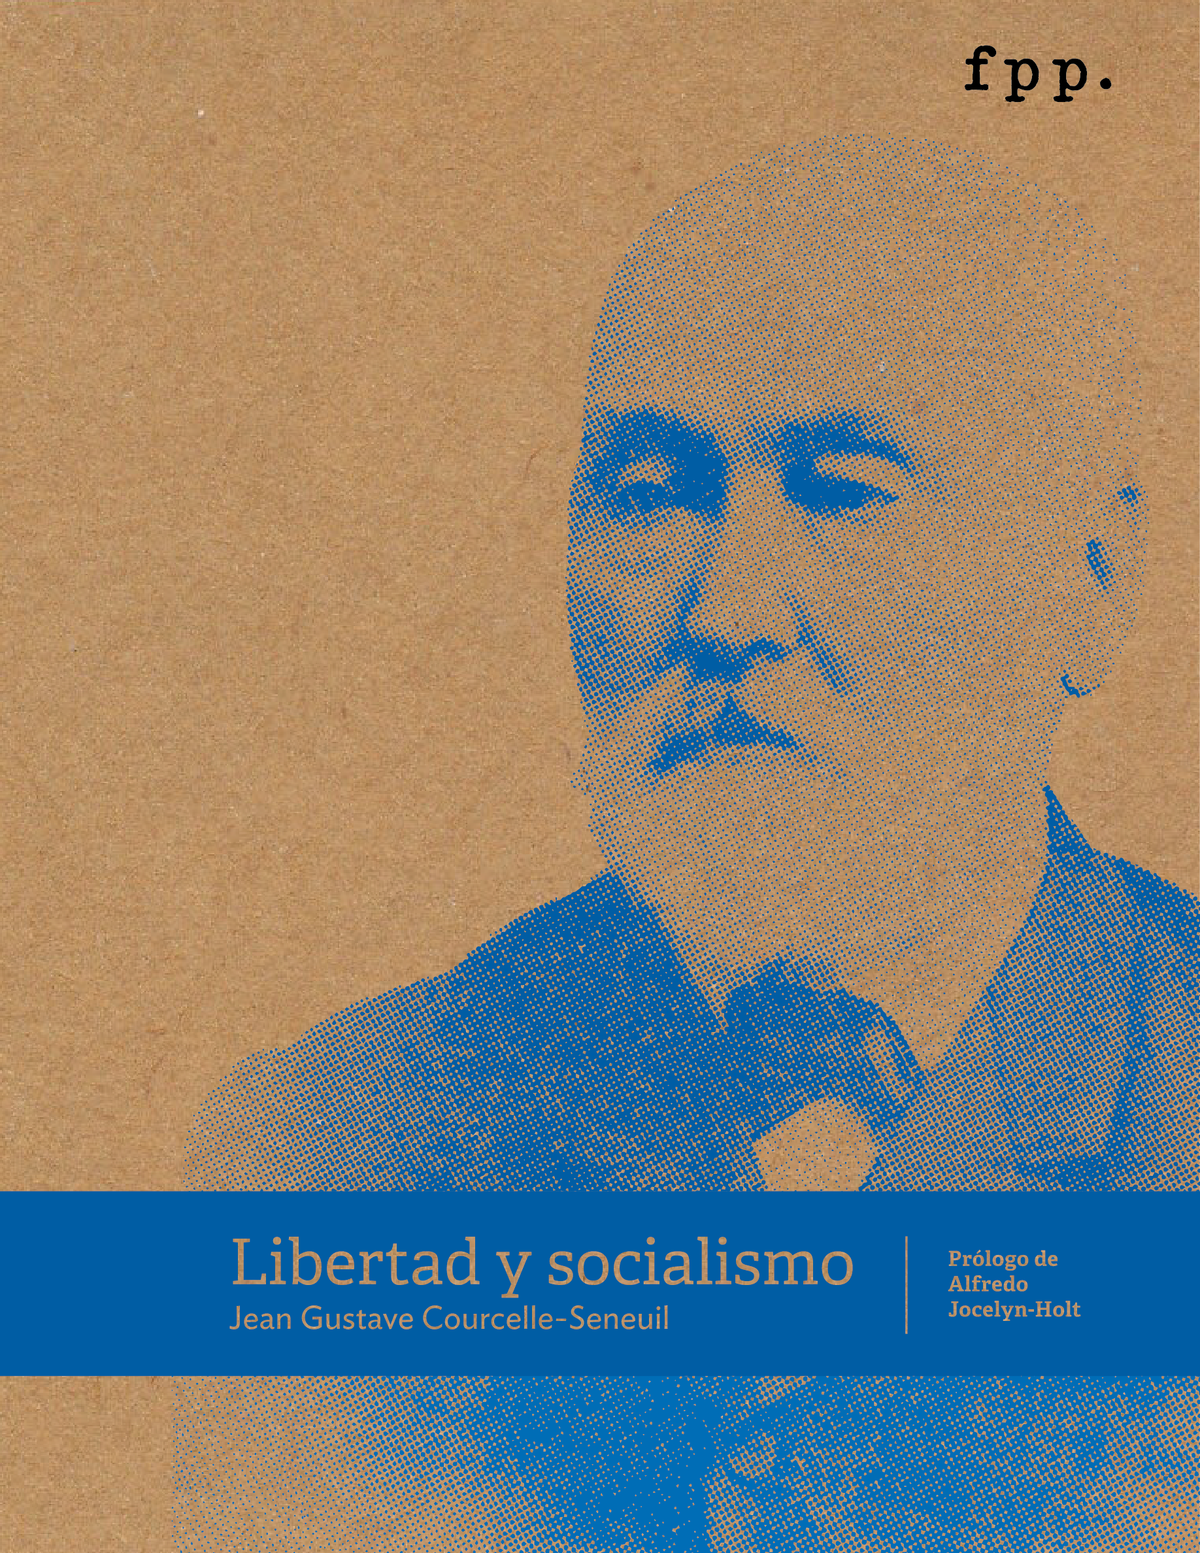 LIBERTAD Y SOCIALISMO -  JEAN GUSTAVE COURCELLE-SENEUIL